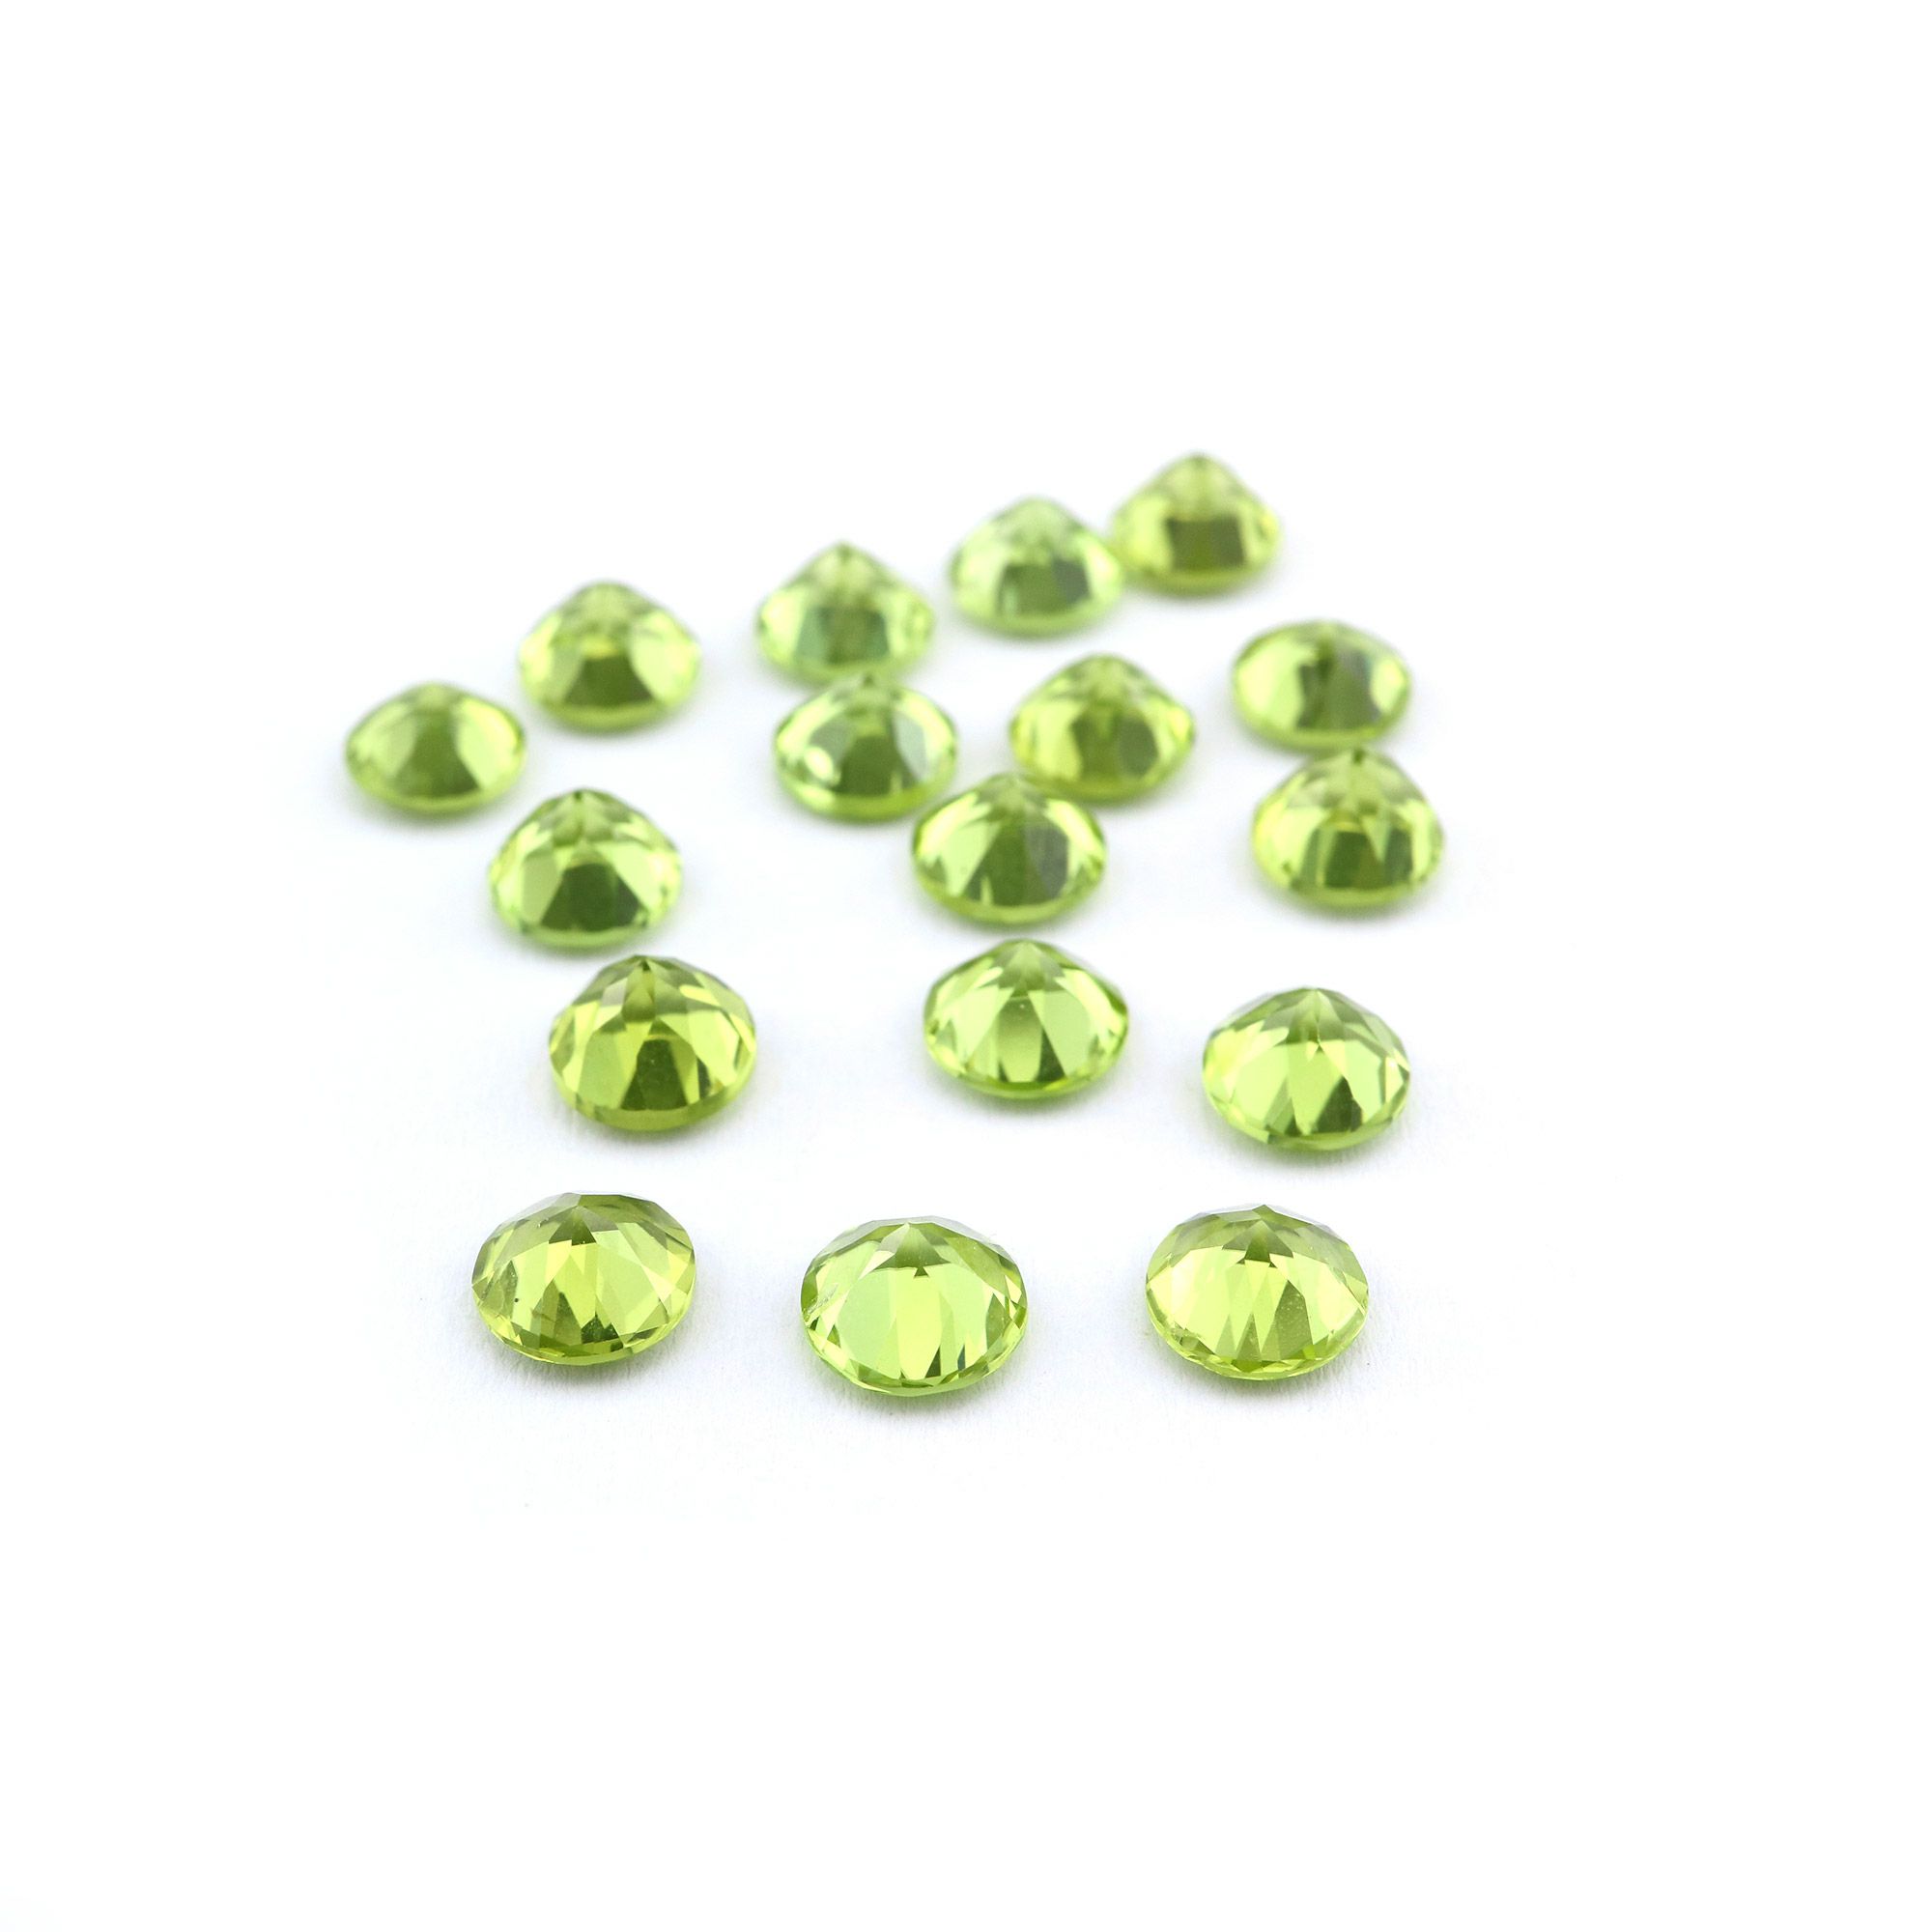 1Pcs 1-8MM Round Green Peridot August Birthstone Faceted Cut Loose Gemstone Natural Semi Precious Stone DIY Jewelry Supplies 4110165 - Click Image to Close